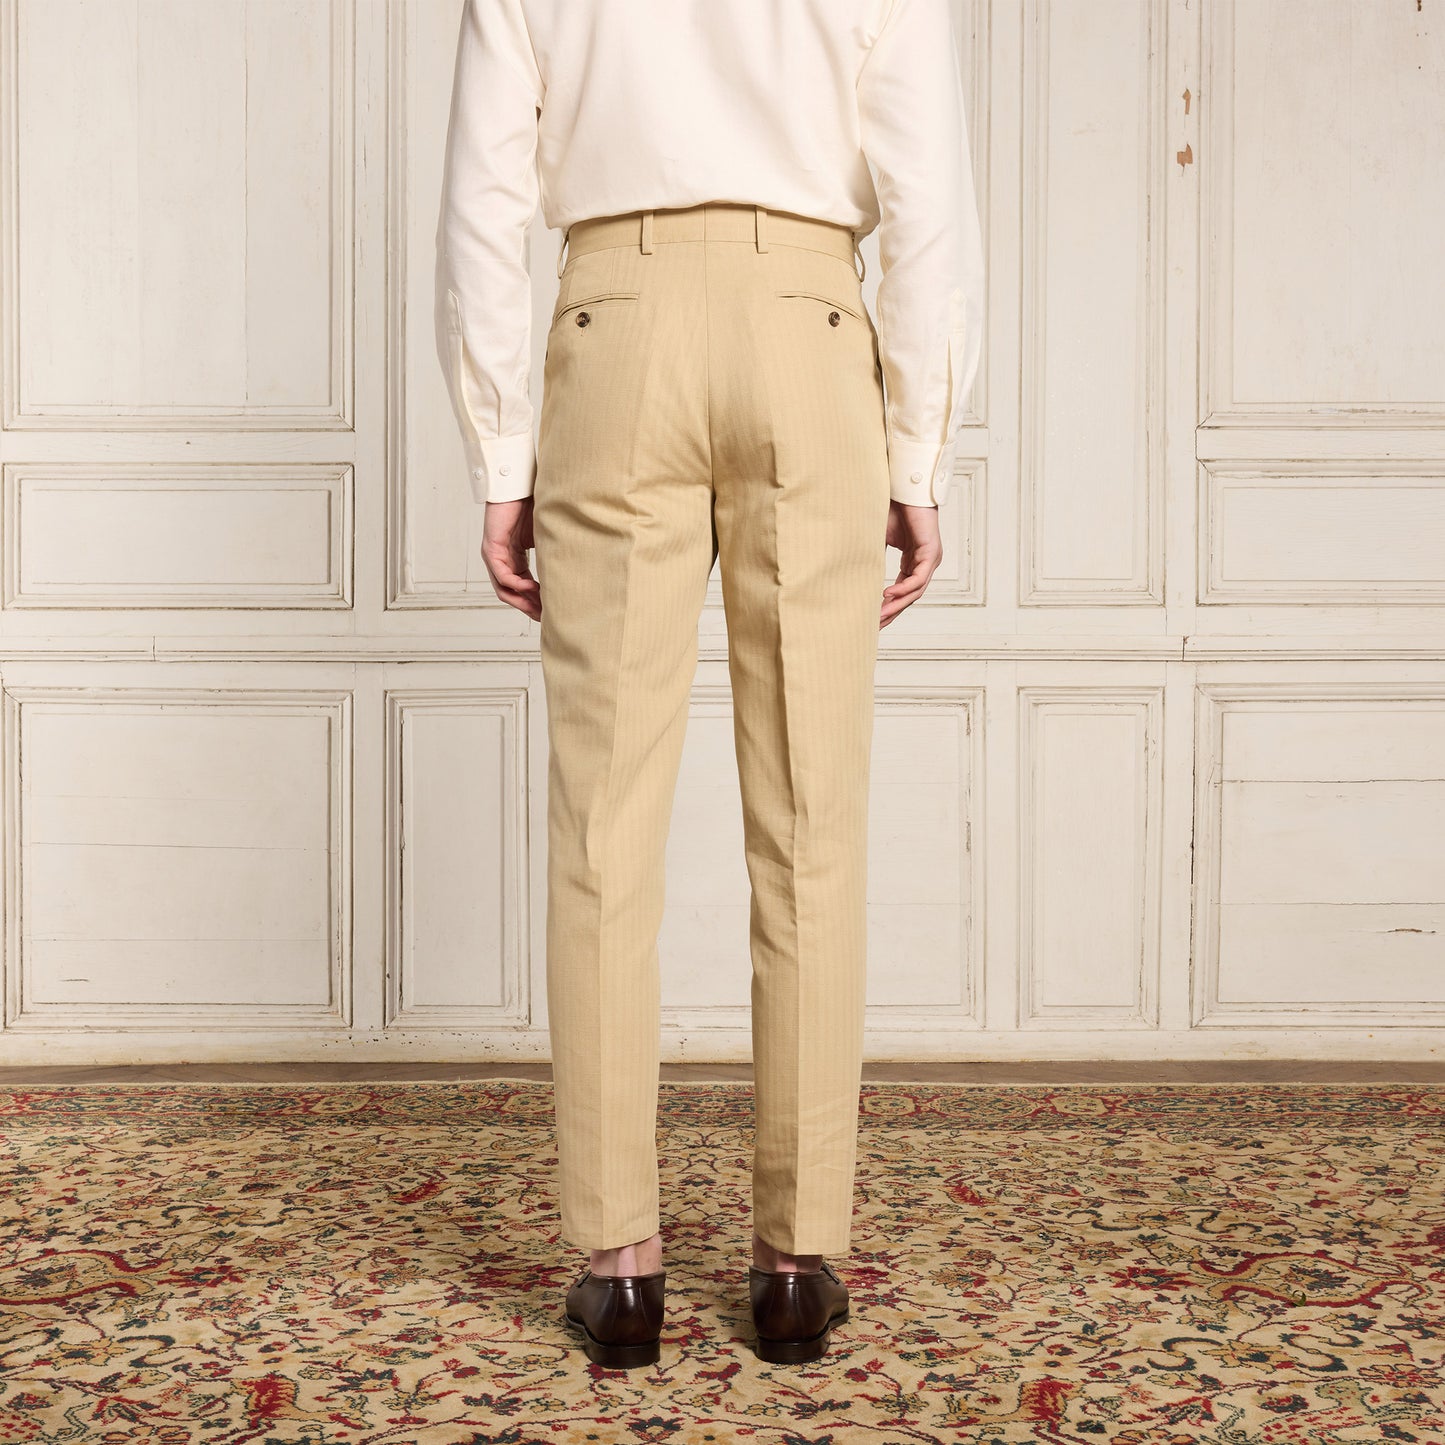 Beige cotton and linen pleated pants